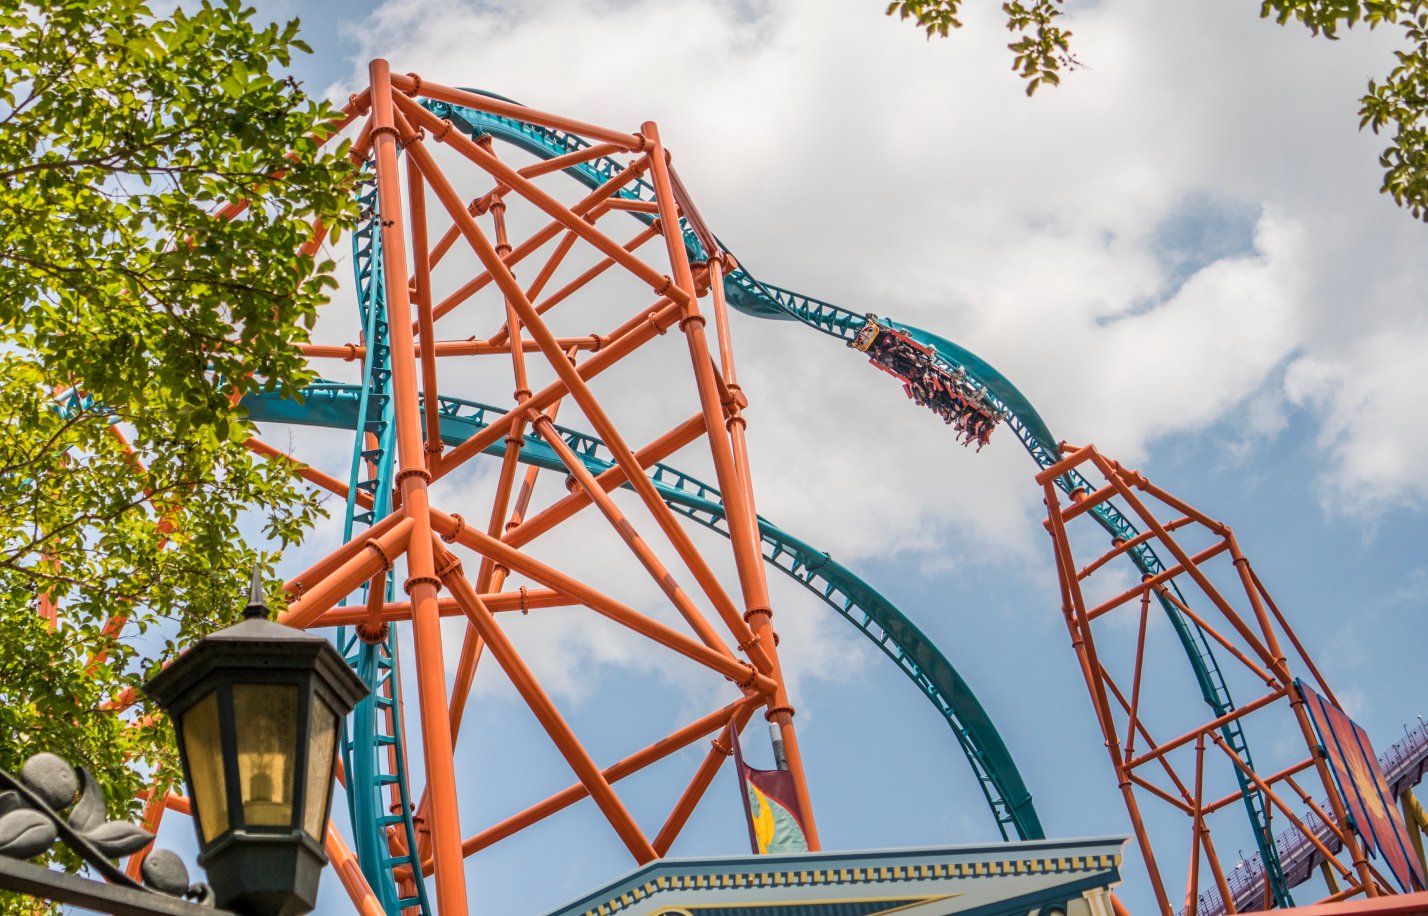 Tempesto available for members during Early Ride time during the Member Appreciation Weekend at Busch Gardens Williamsburg.